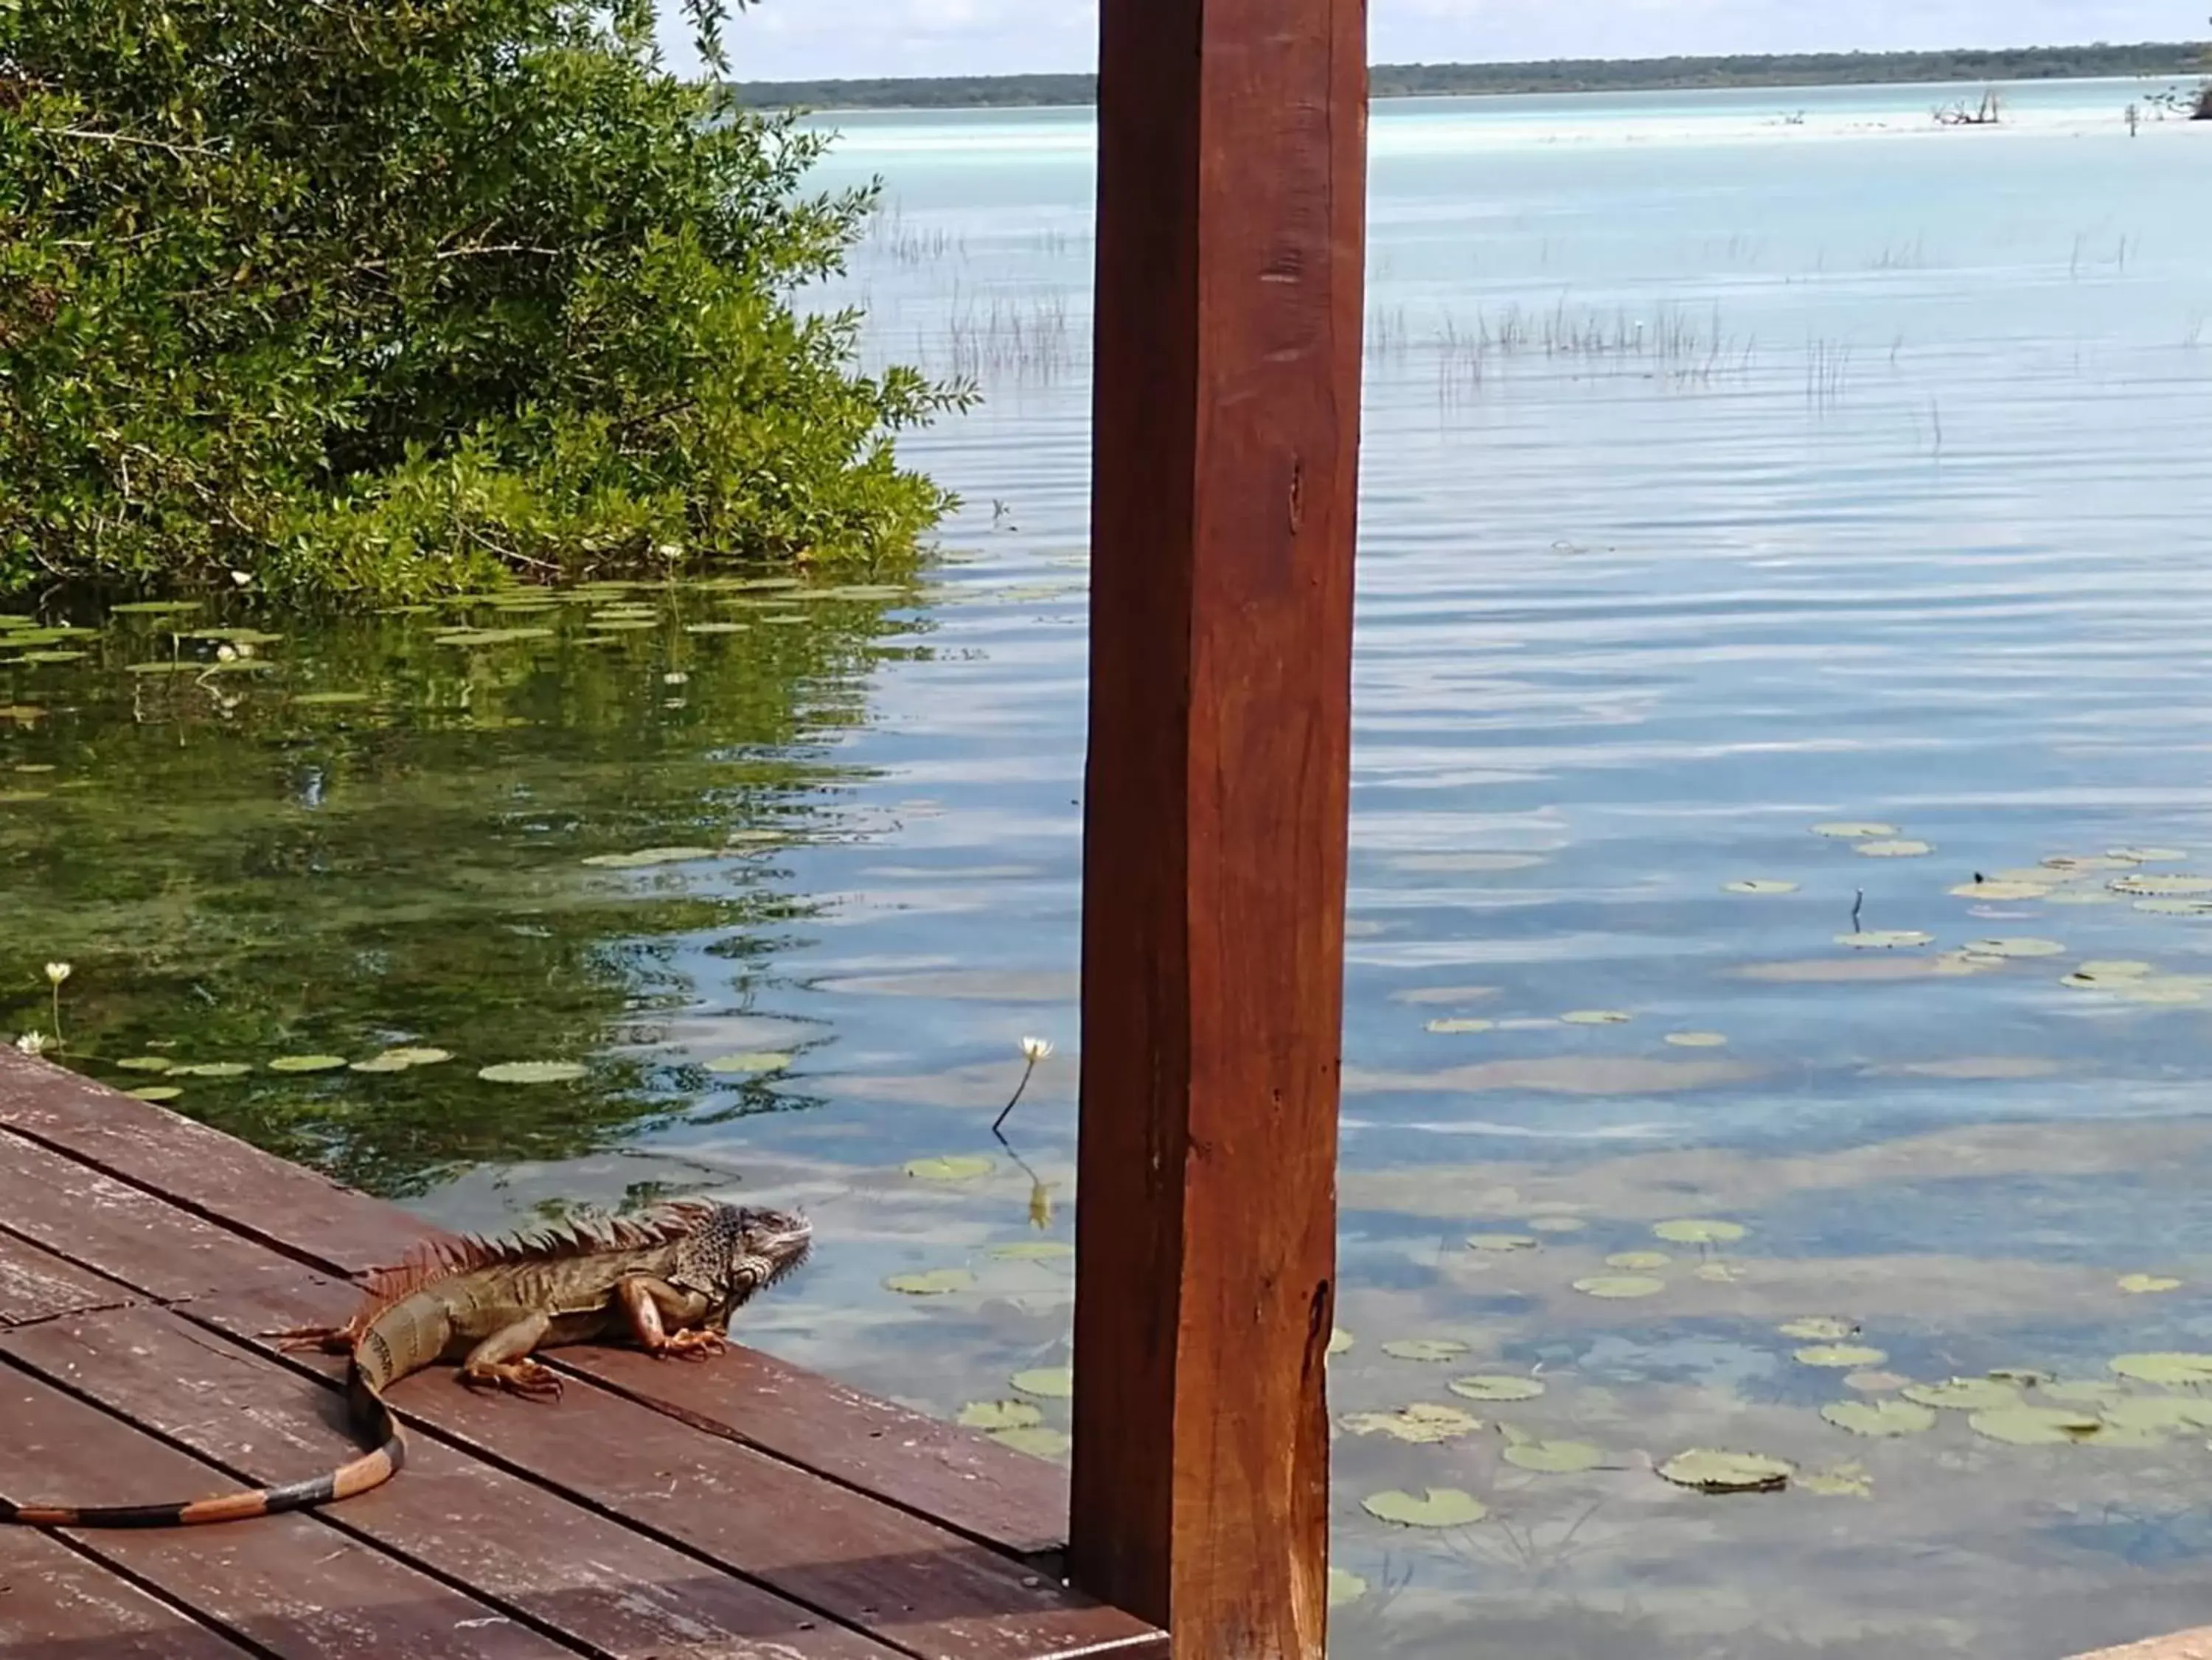 Off site, Pets in Casa Shiva Bacalar by MIJ